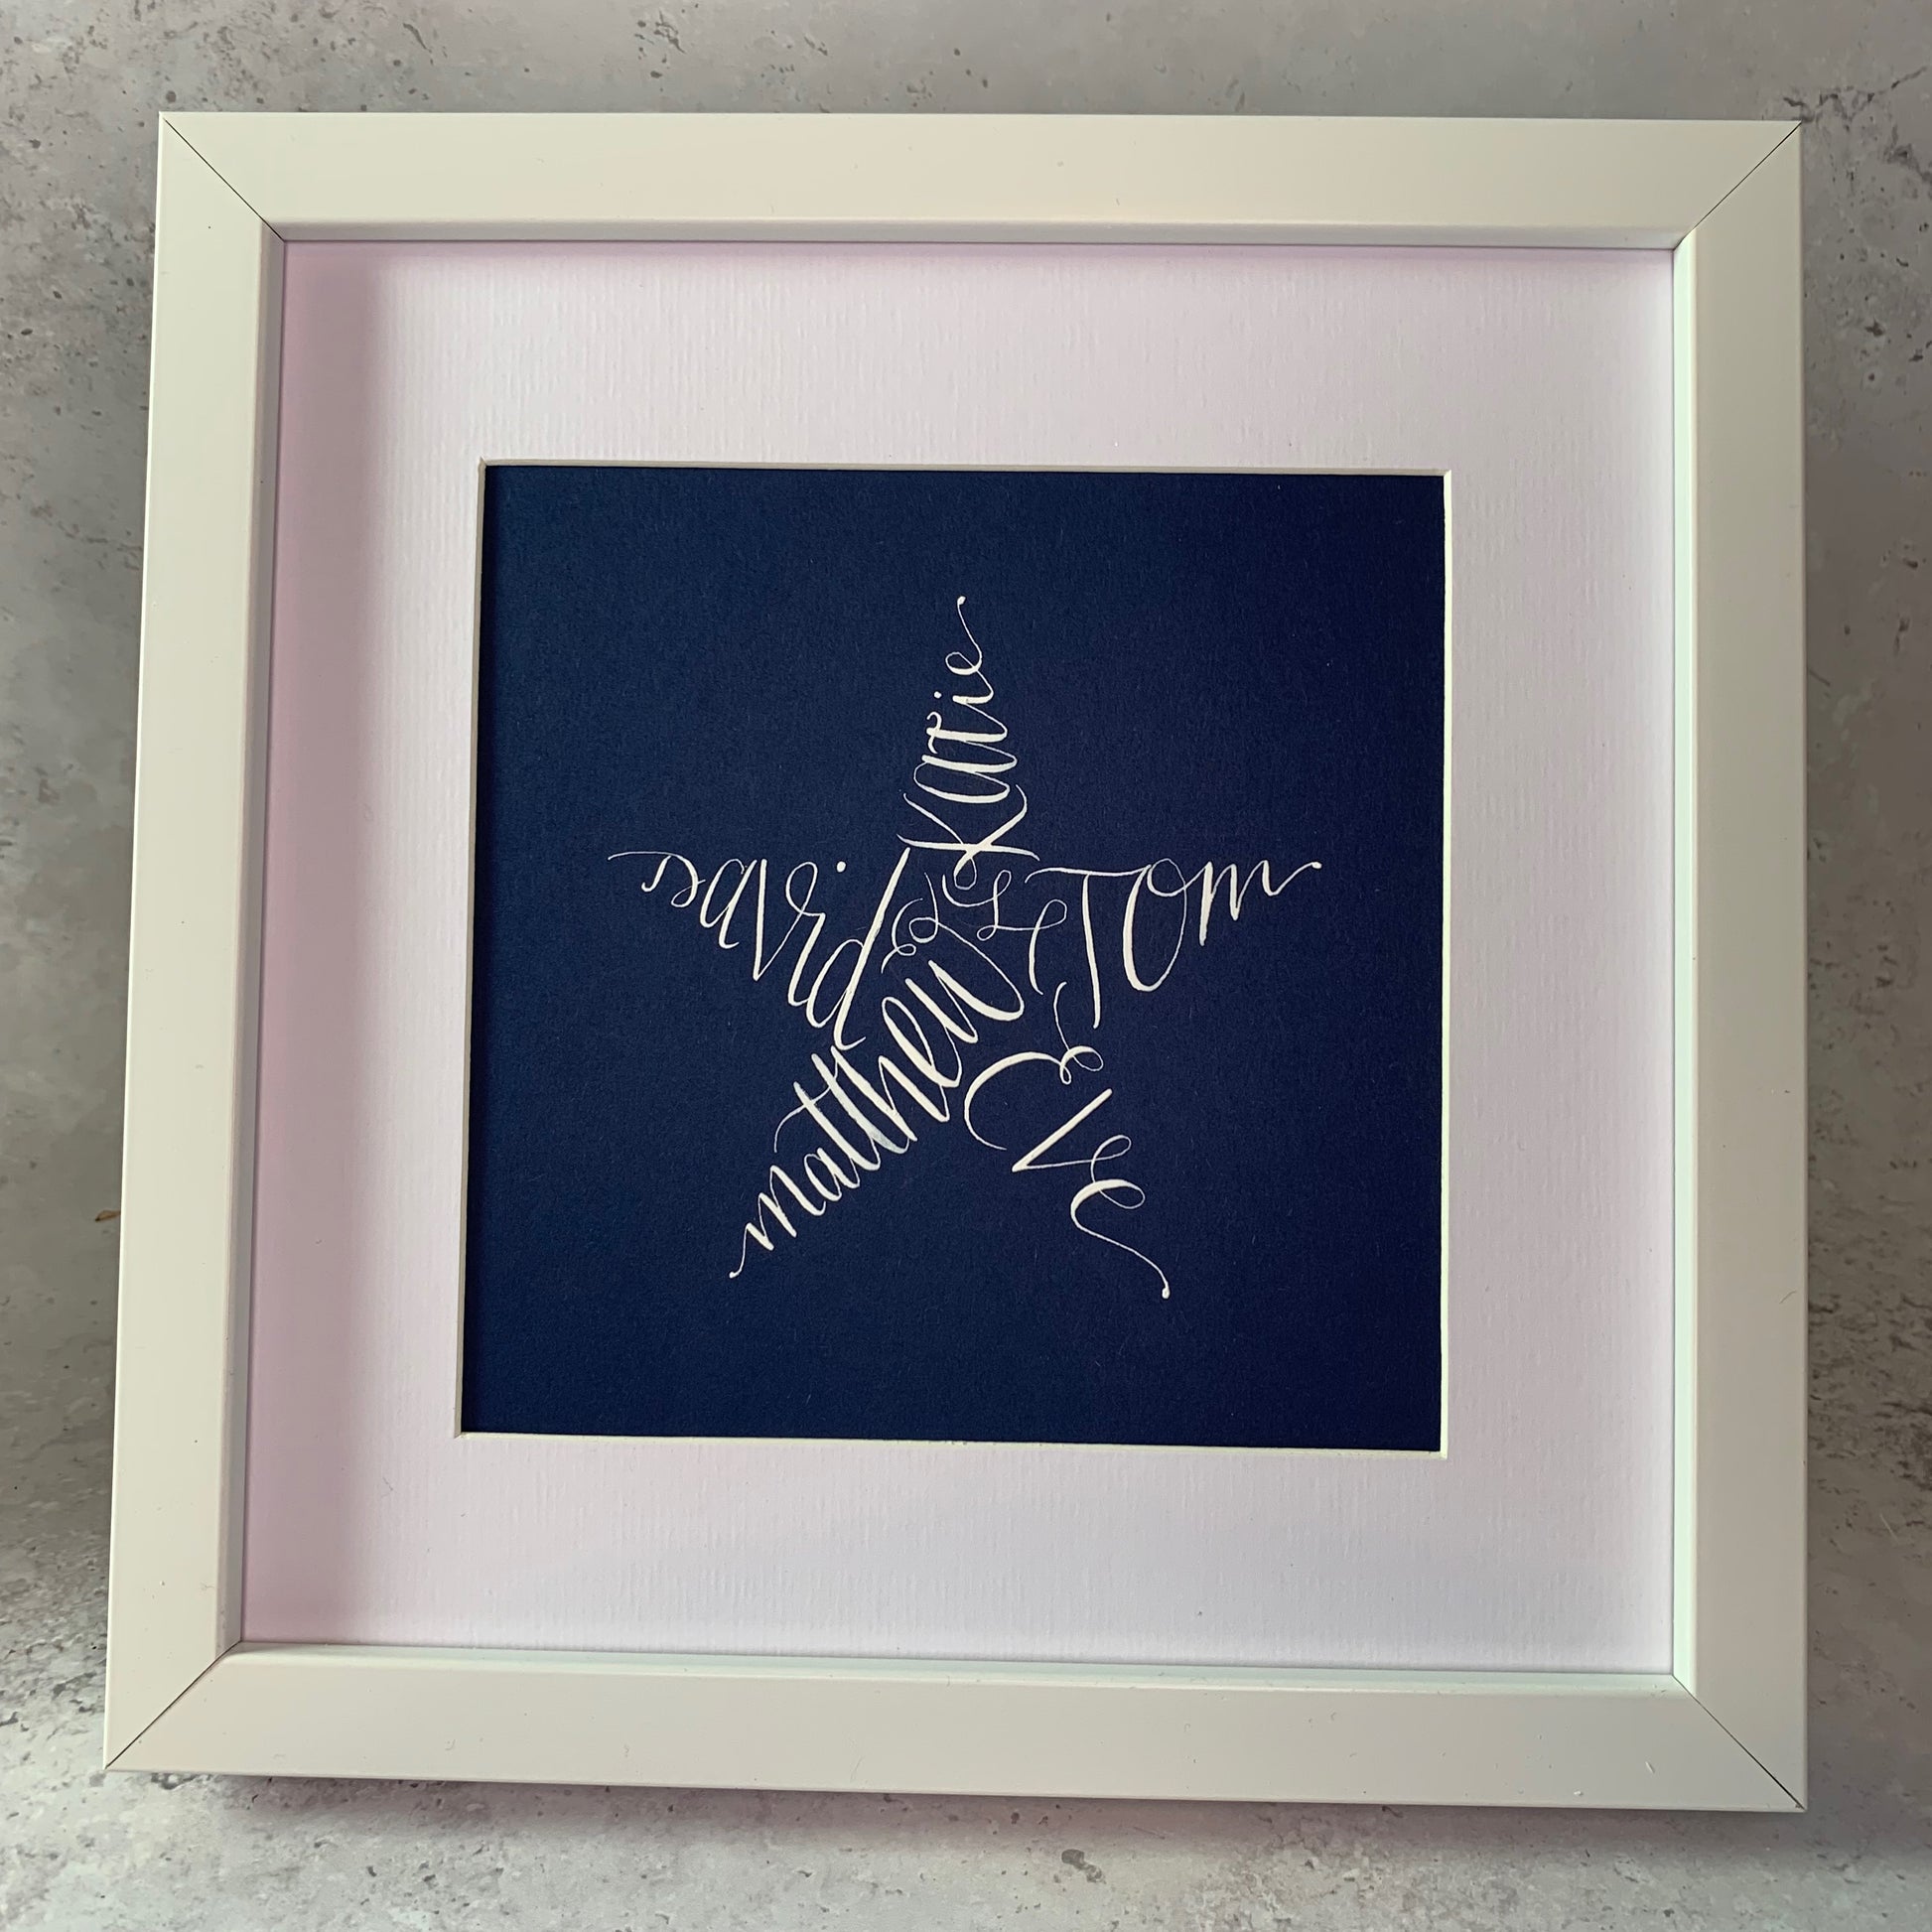 white frame and mount in square shape, navy card with white star calligraphy names